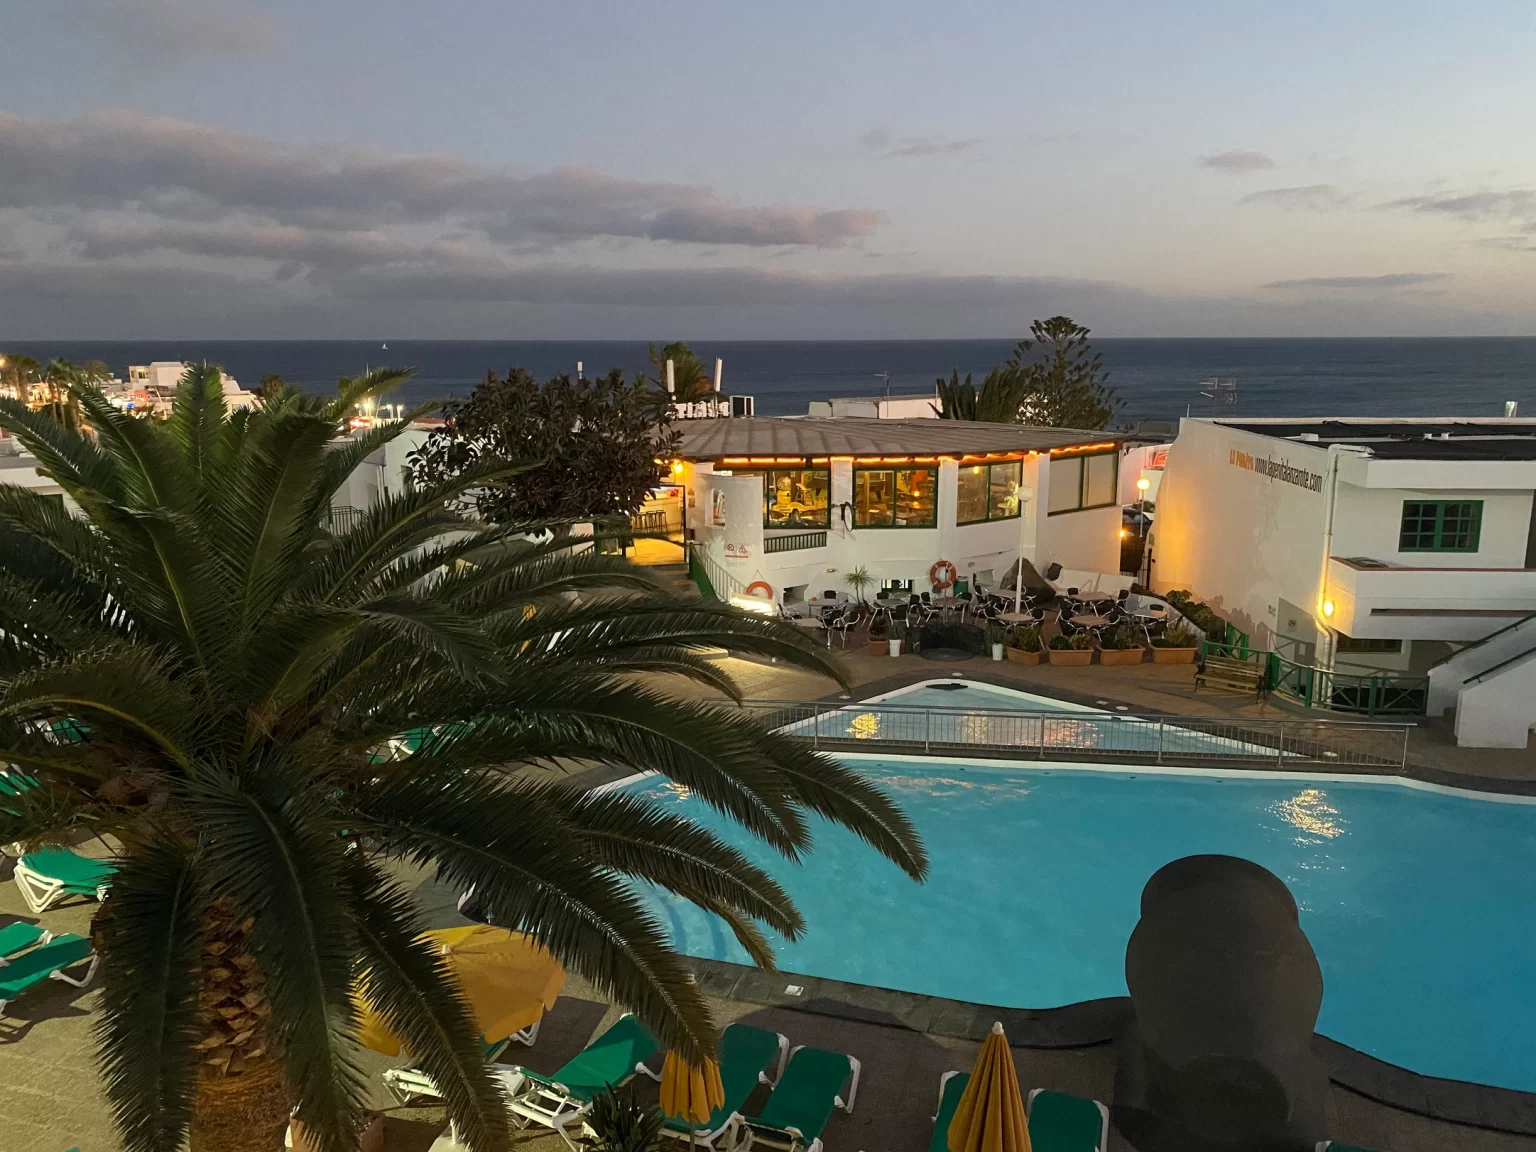 2020 – Lanzarote – Day 6 & Going Home